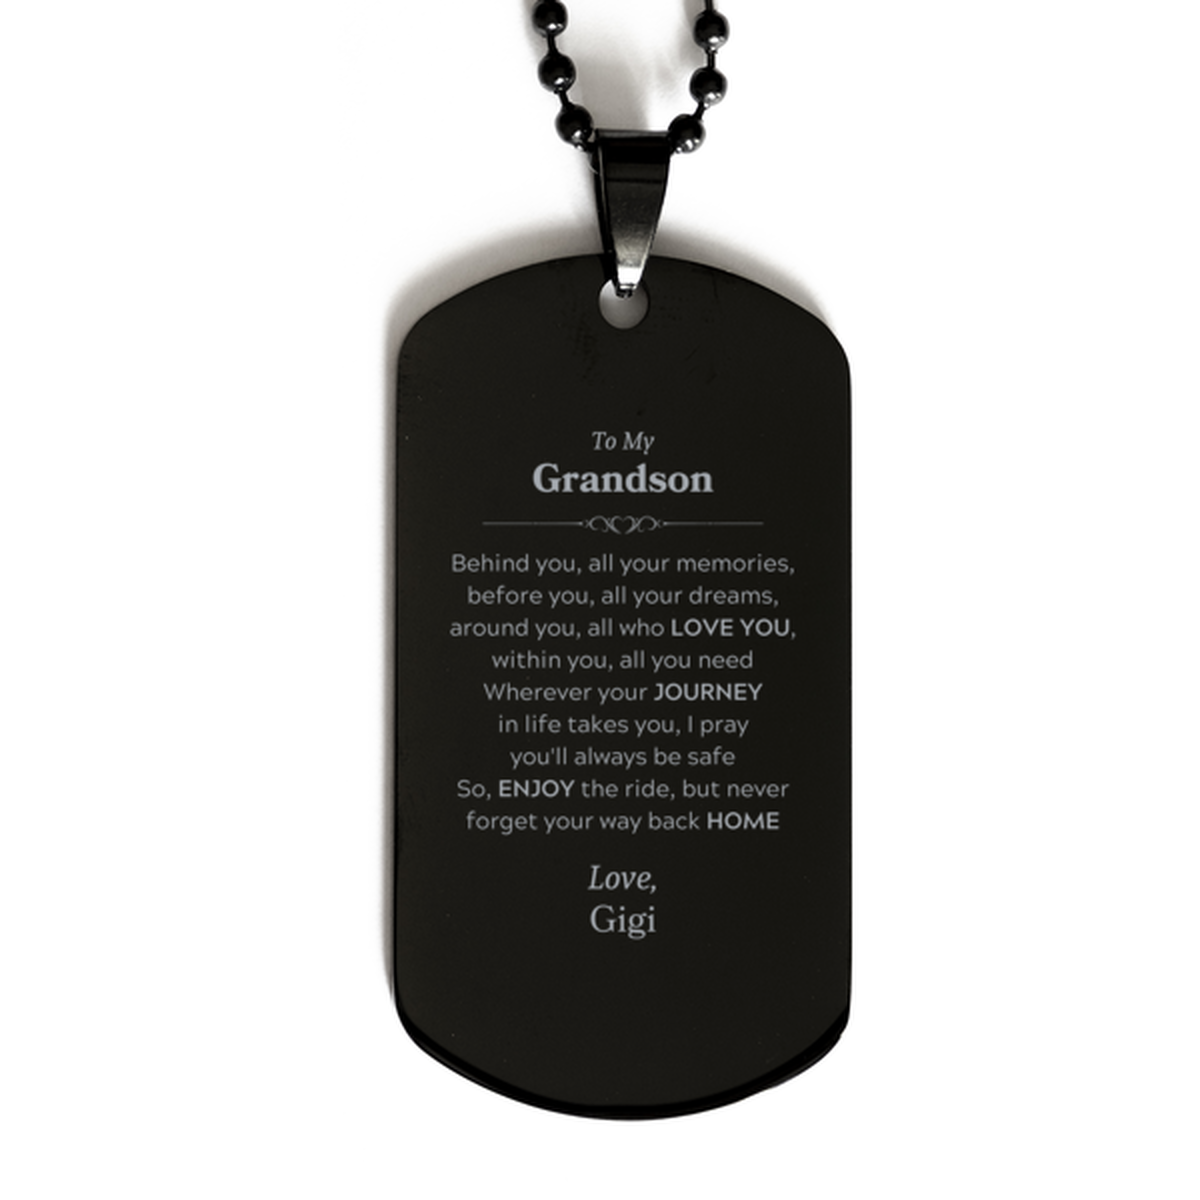 To My Grandson Graduation Gifts from Gigi, Grandson Black Dog Tag Christmas Birthday Gifts for Grandson Behind you, all your memories, before you, all your dreams. Love, Gigi